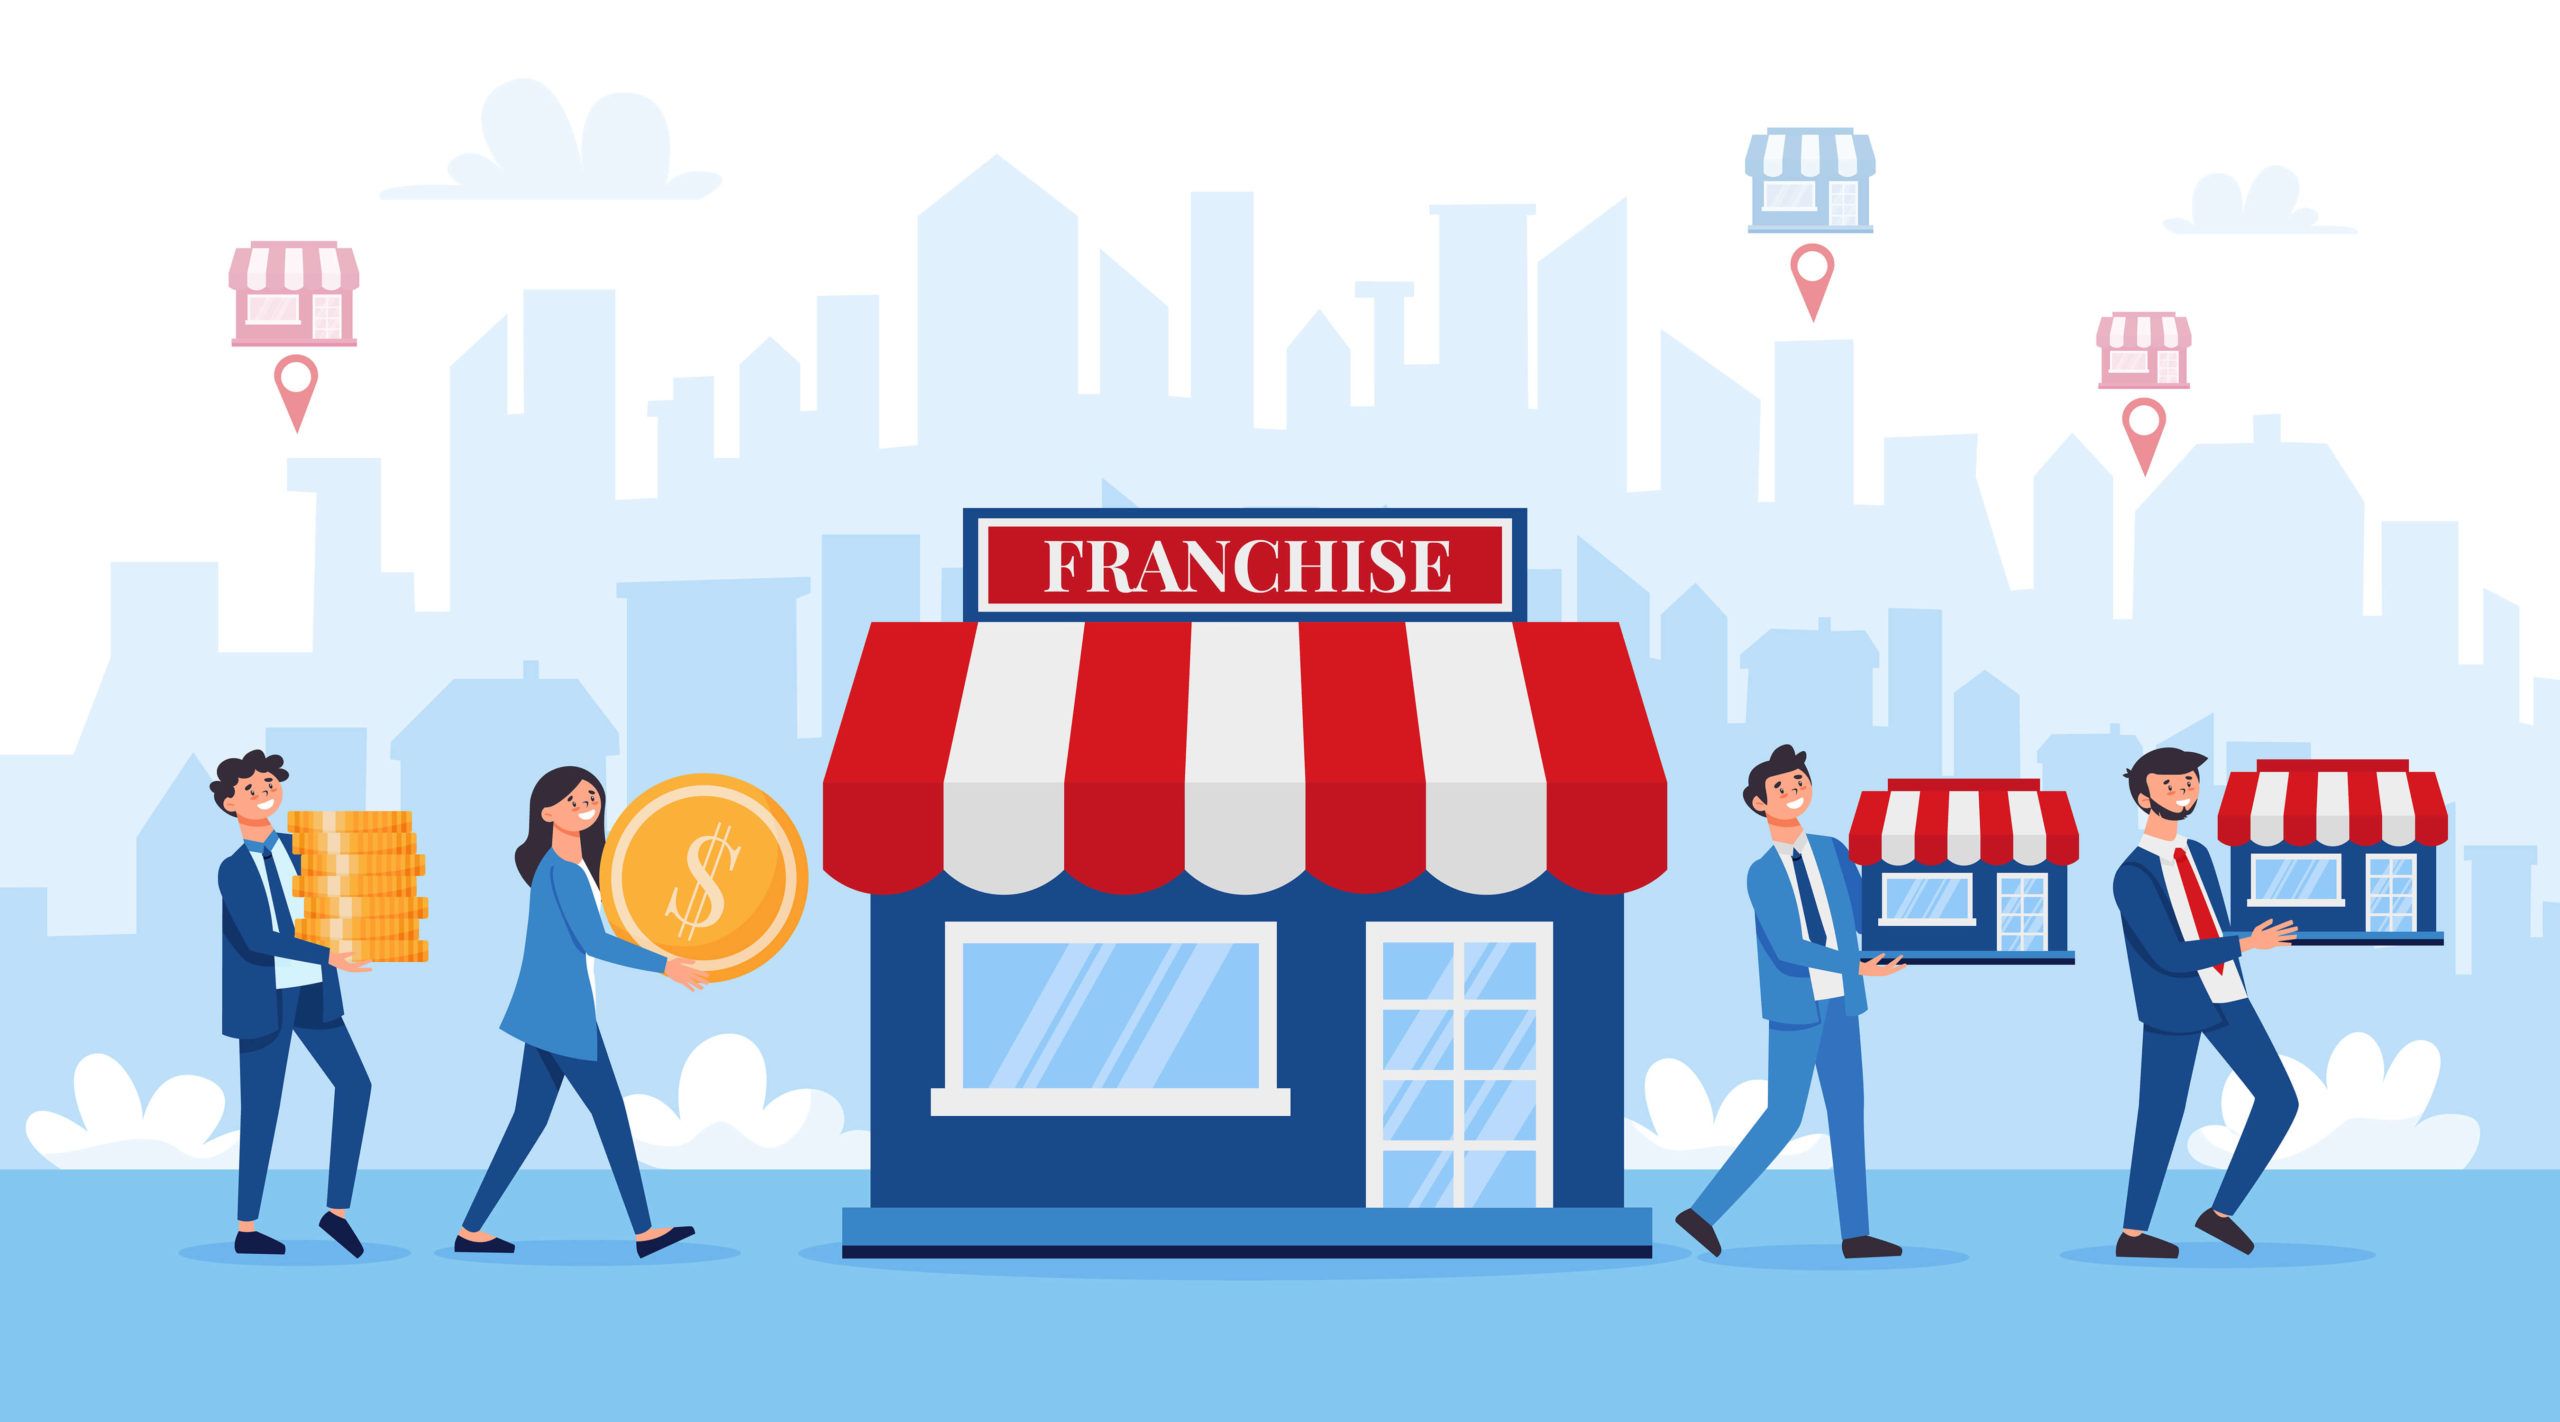 10 Best Ways To Market Your Franchise